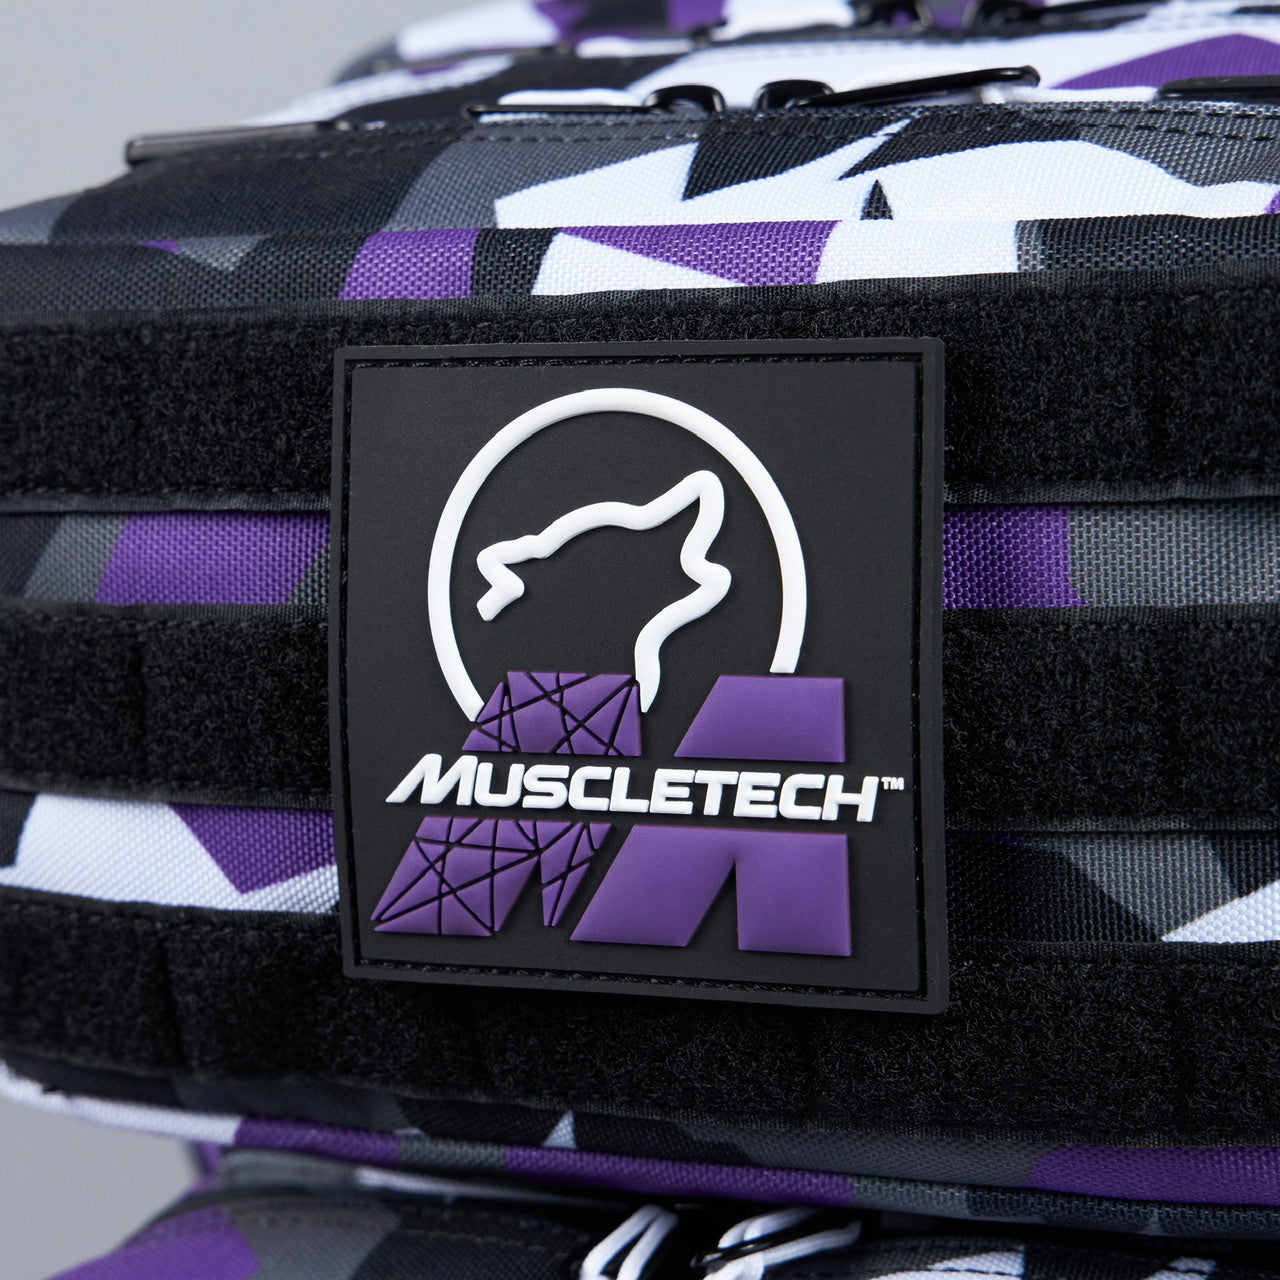 35L MuscleTech & WOLFpak Collaboration Backpack